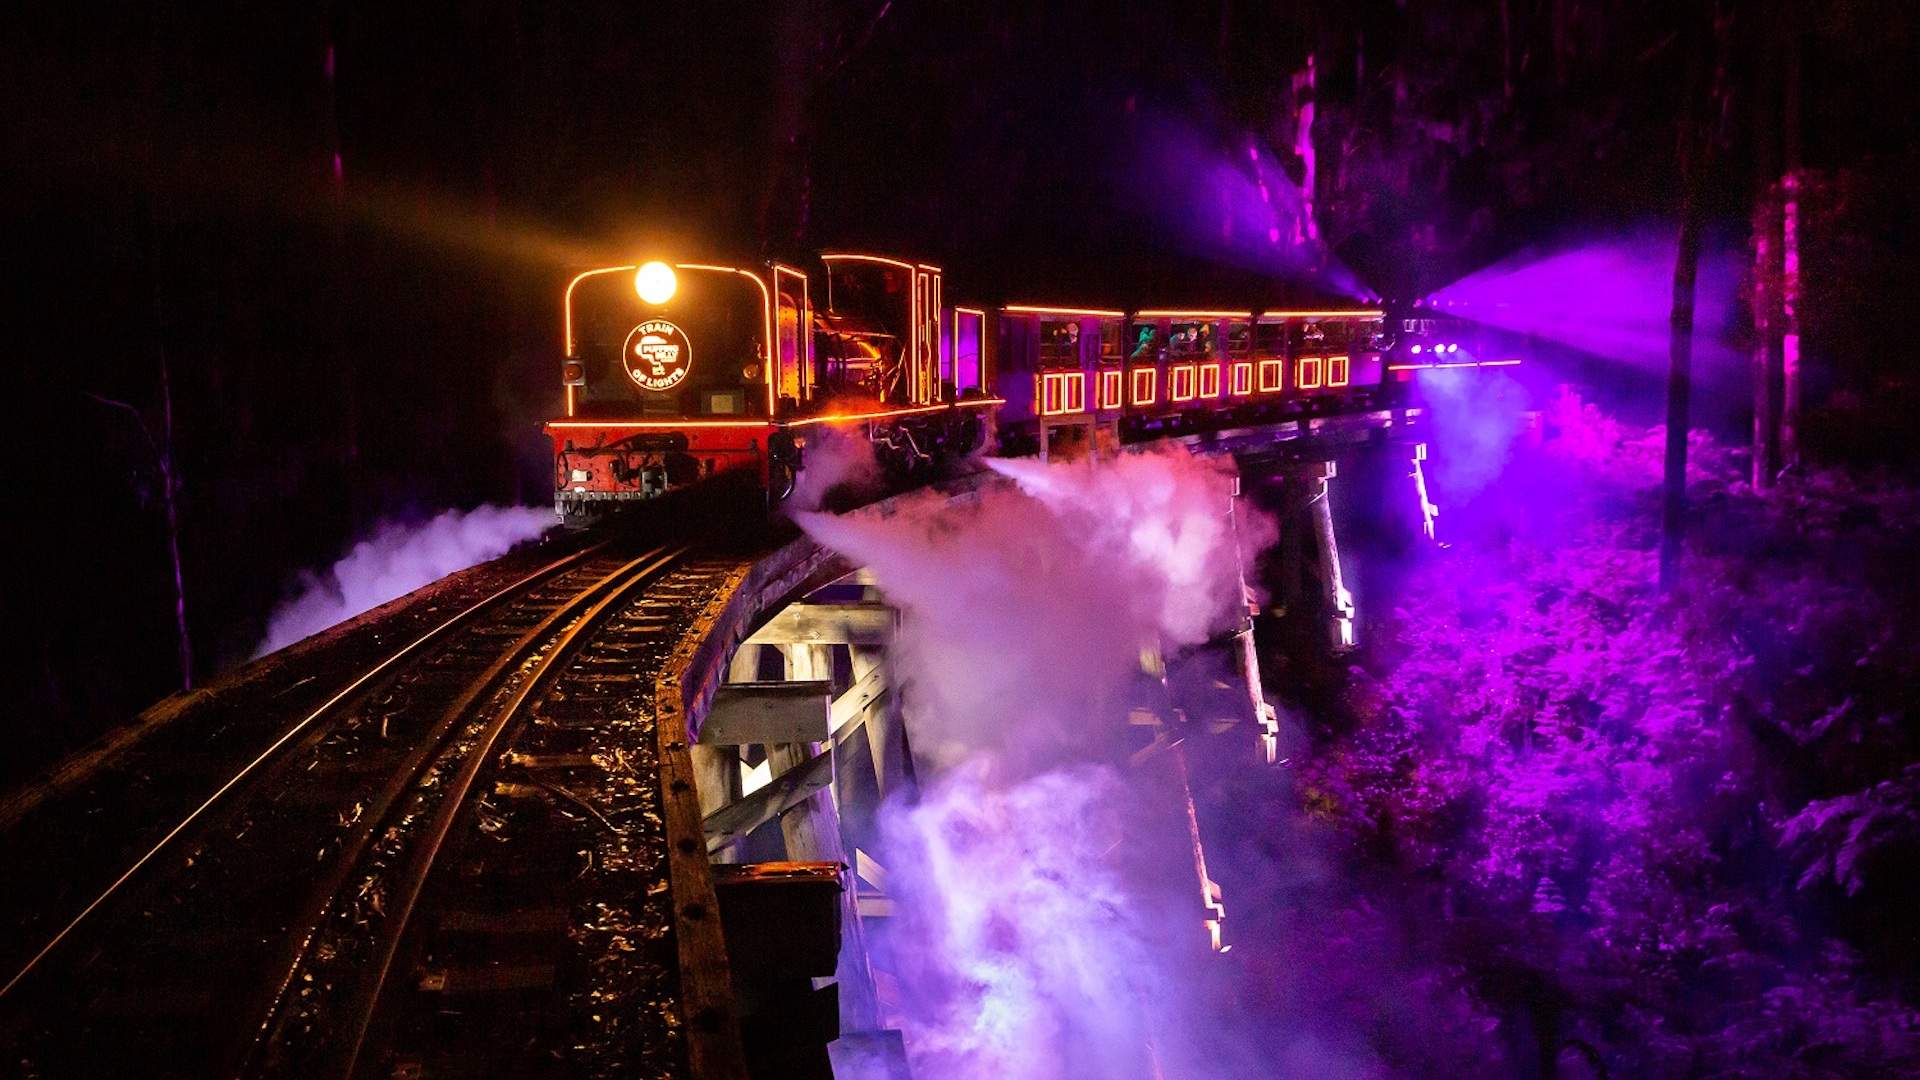 All Aboard: Puffing Billy Will Be Transformed with an Immersive Light Experience This Winter